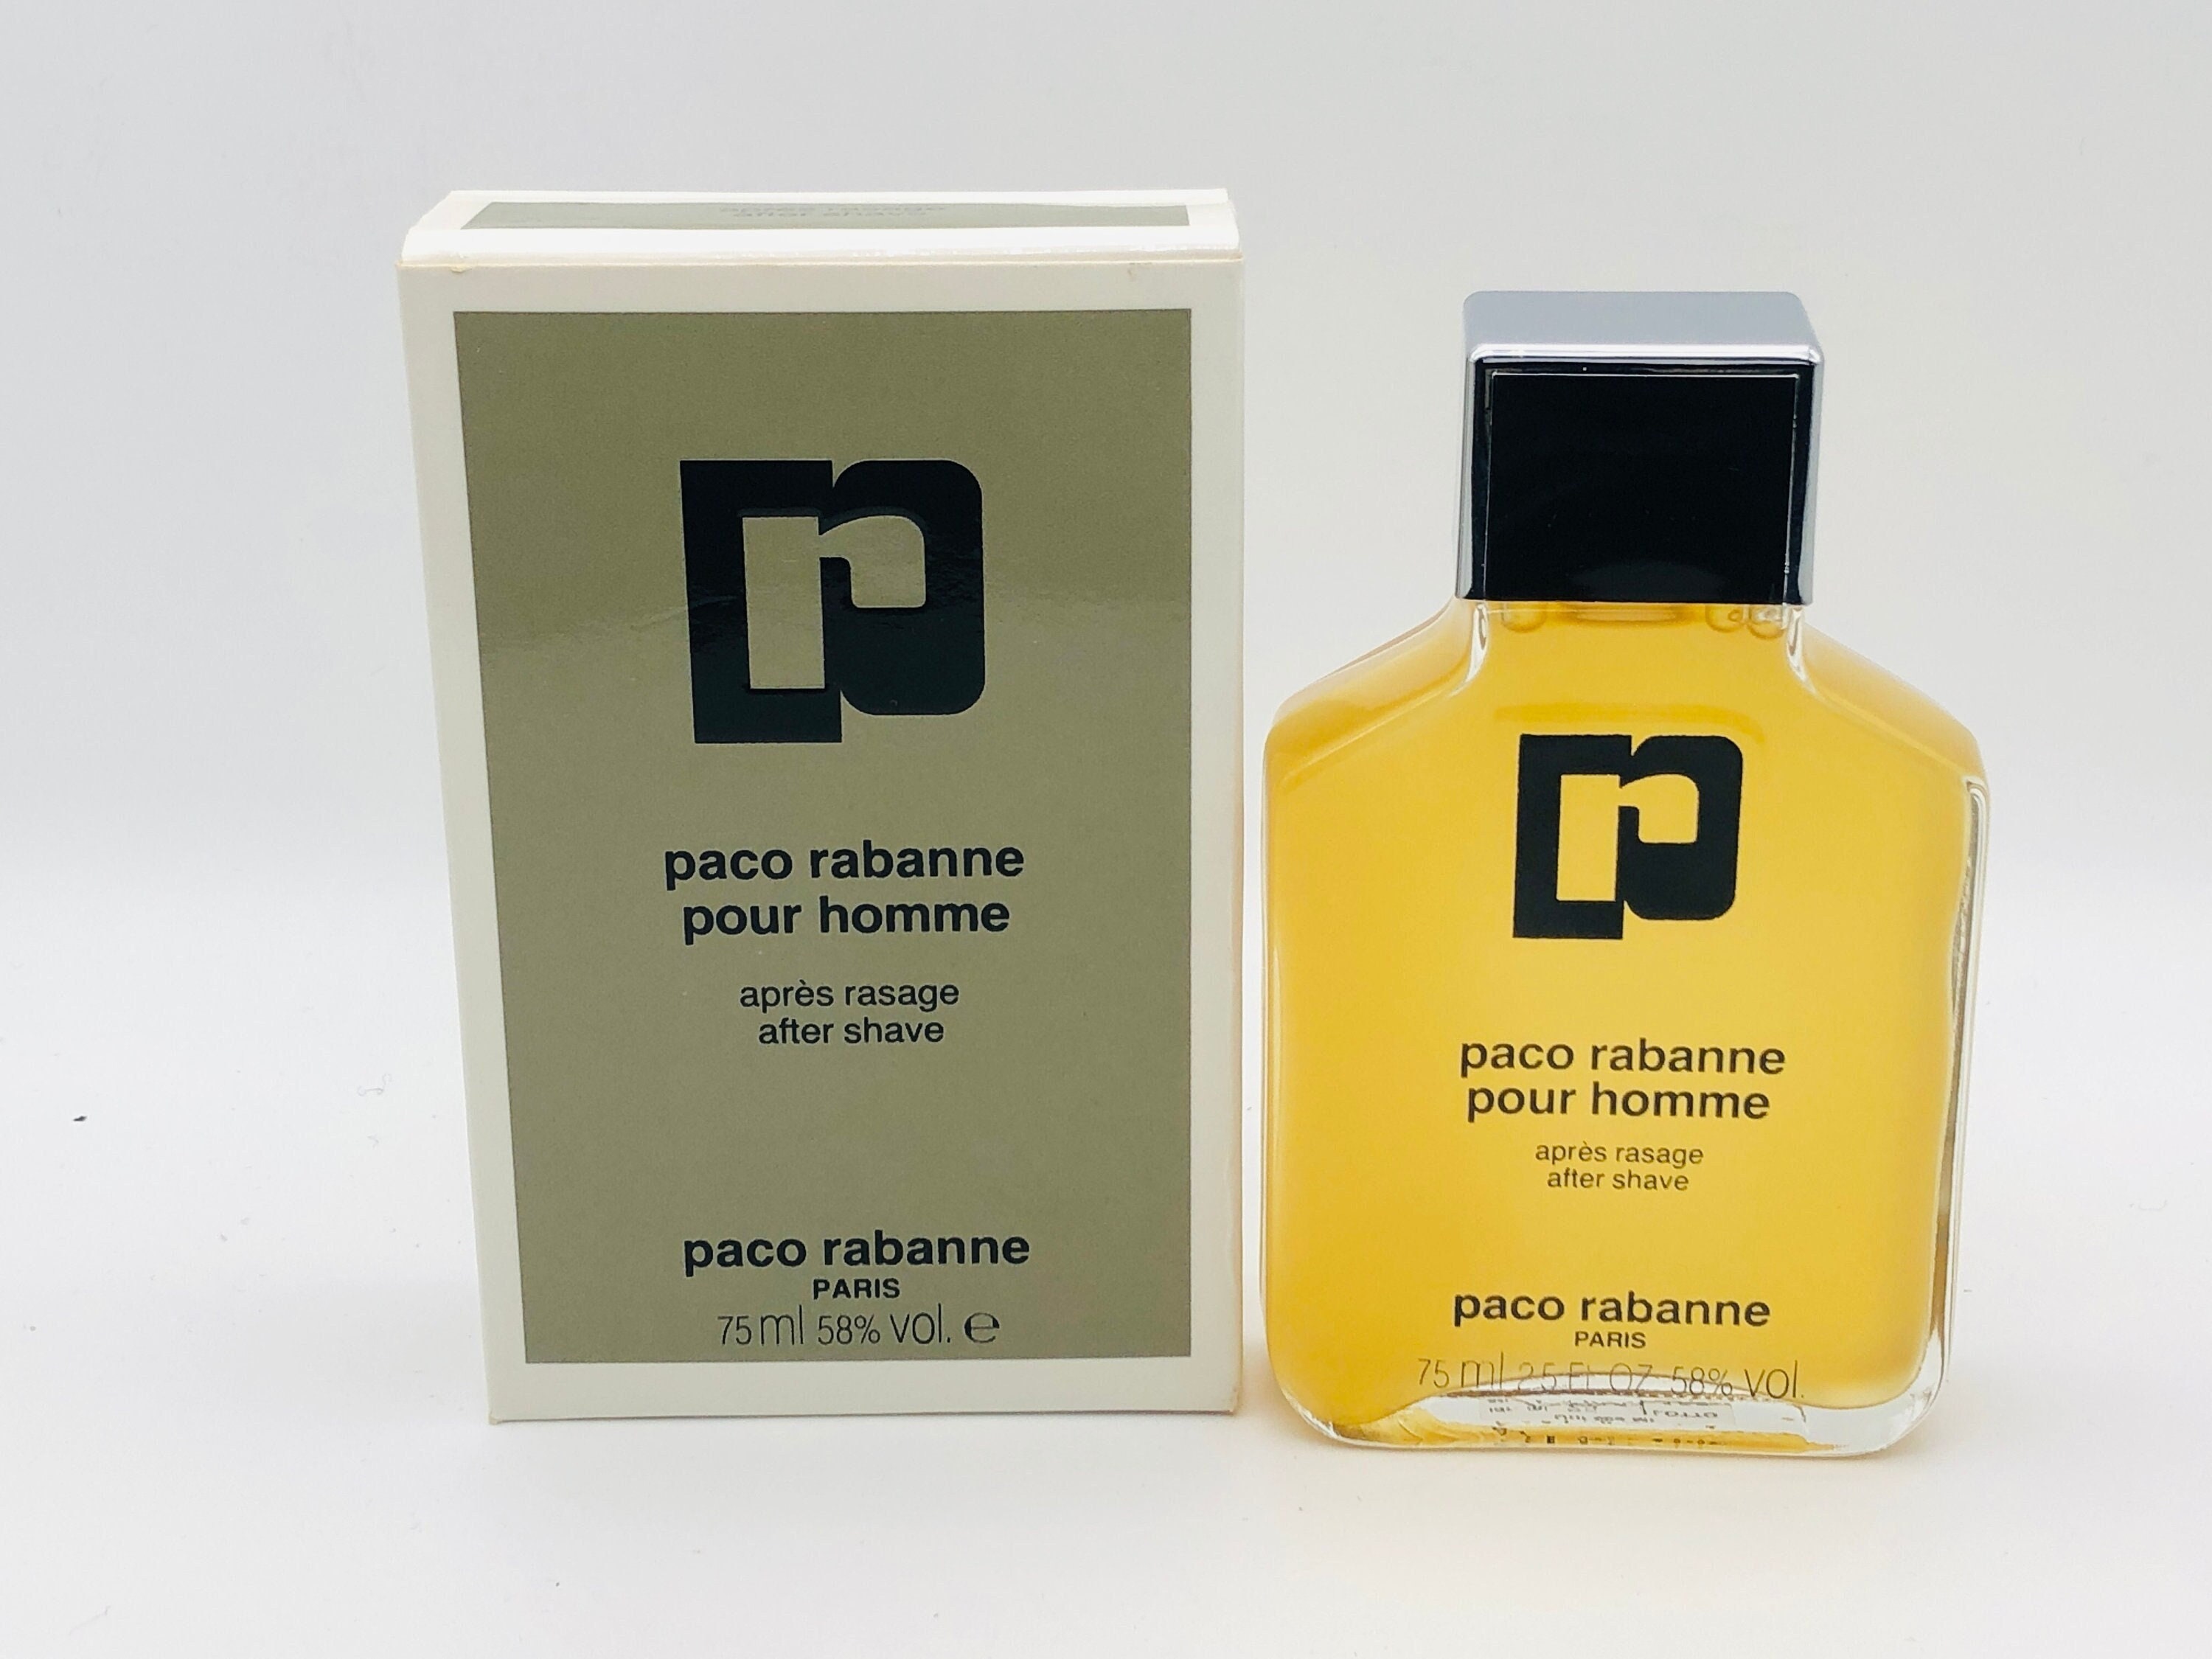 Homme paco. Paco Rabanne after Shave. Пако Рабан спорт духи мужские. Пако Рабан описание для мужчины. Rosendo Mateu 5 Парфюм.